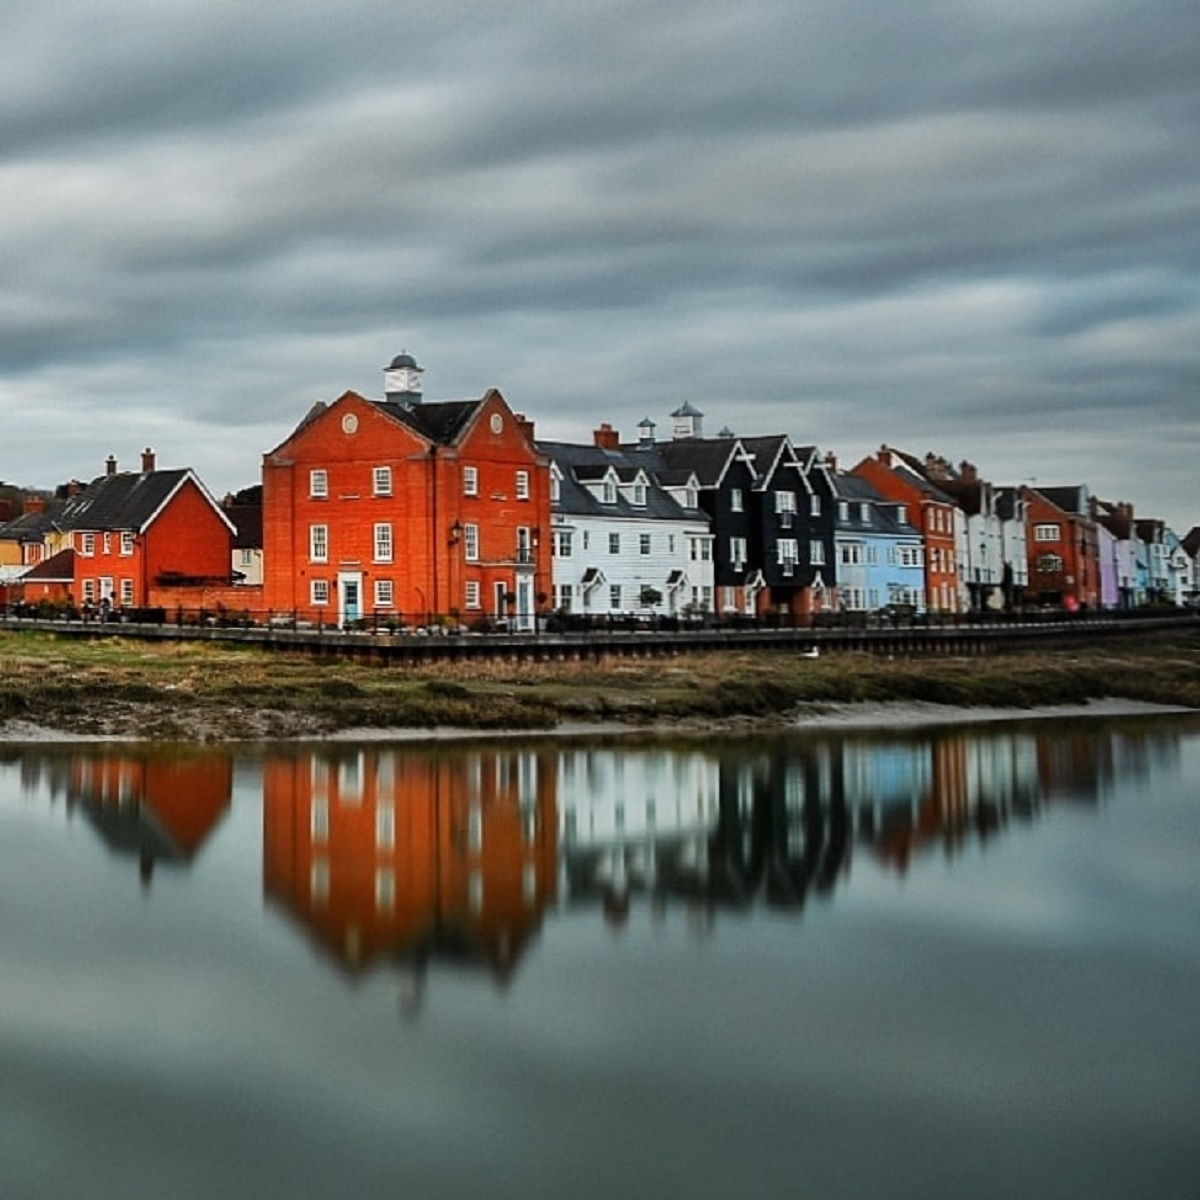 Mirror image - Tomasz Zareba took this eye-catching picture in Wivenhoe